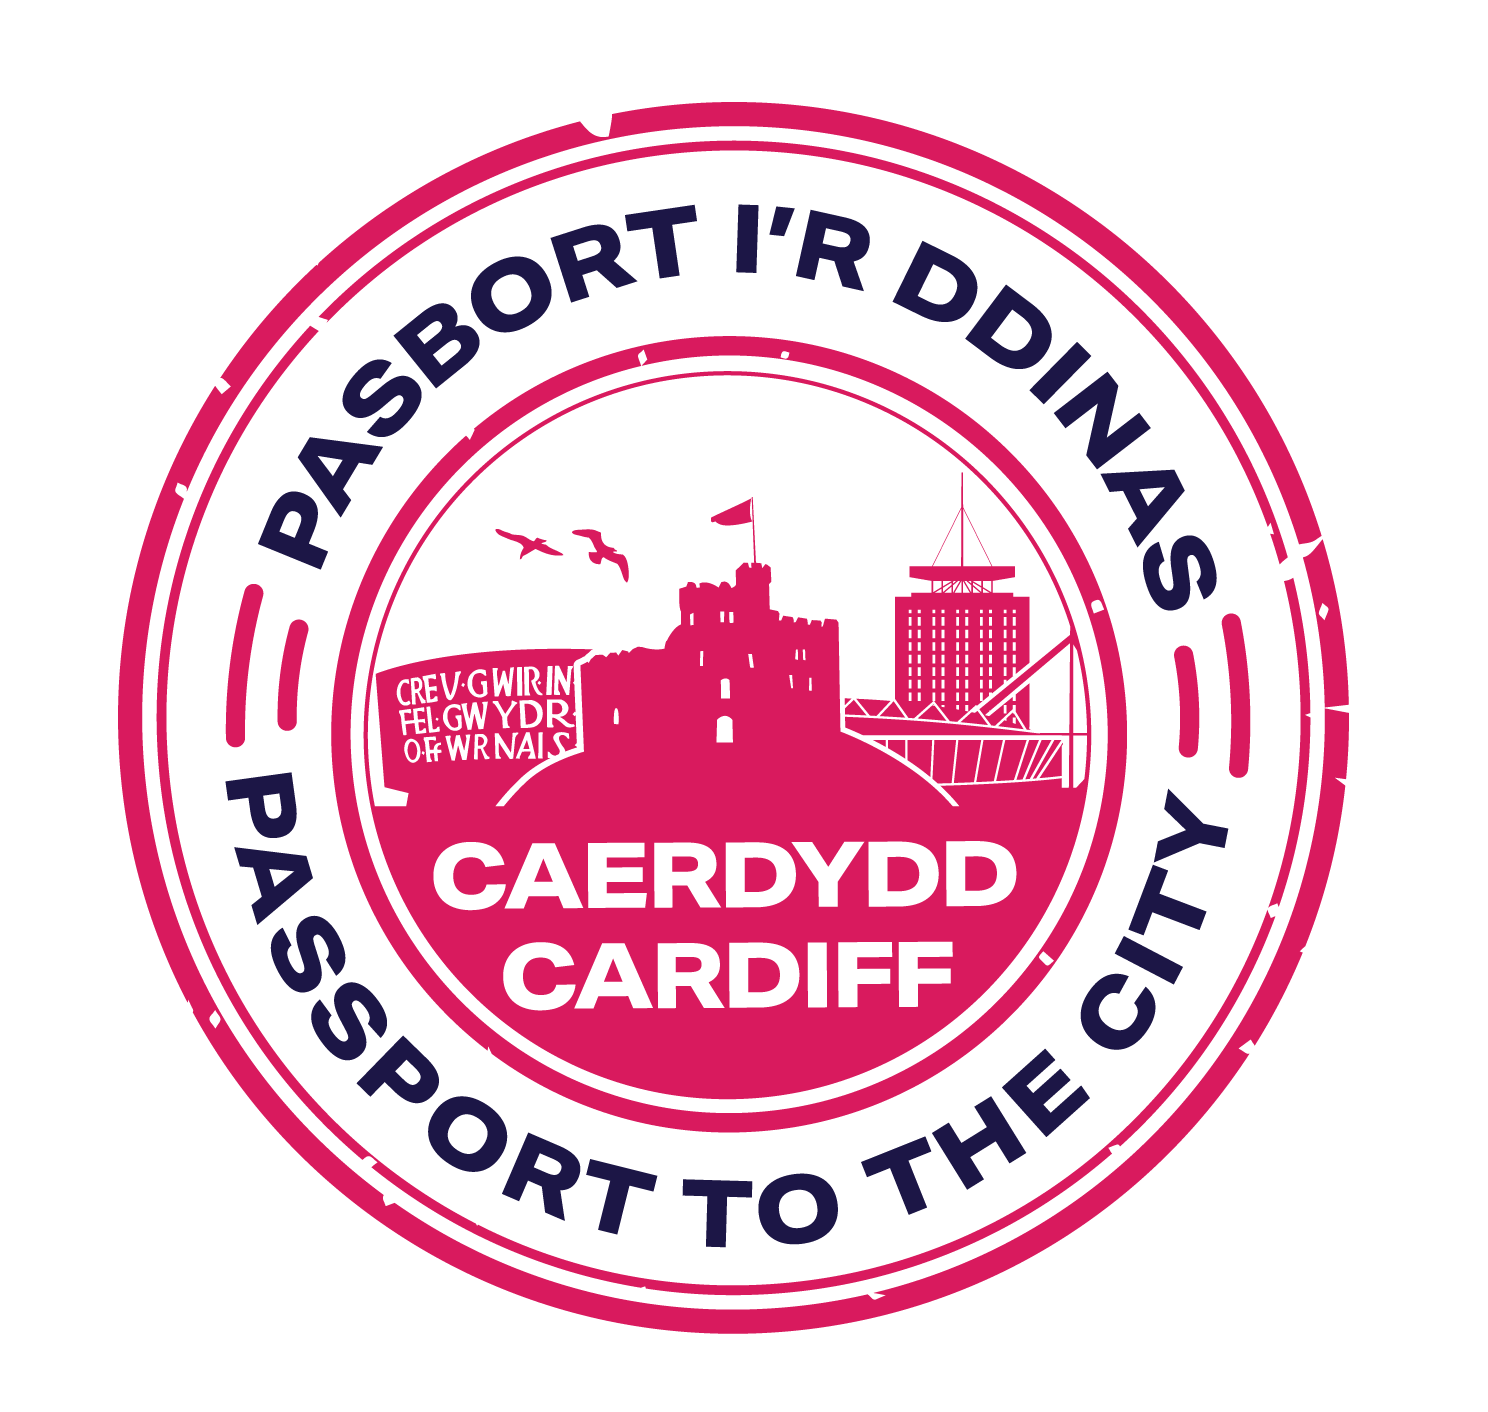 Cardiff Challenge Map - Cardiff Passport to the city